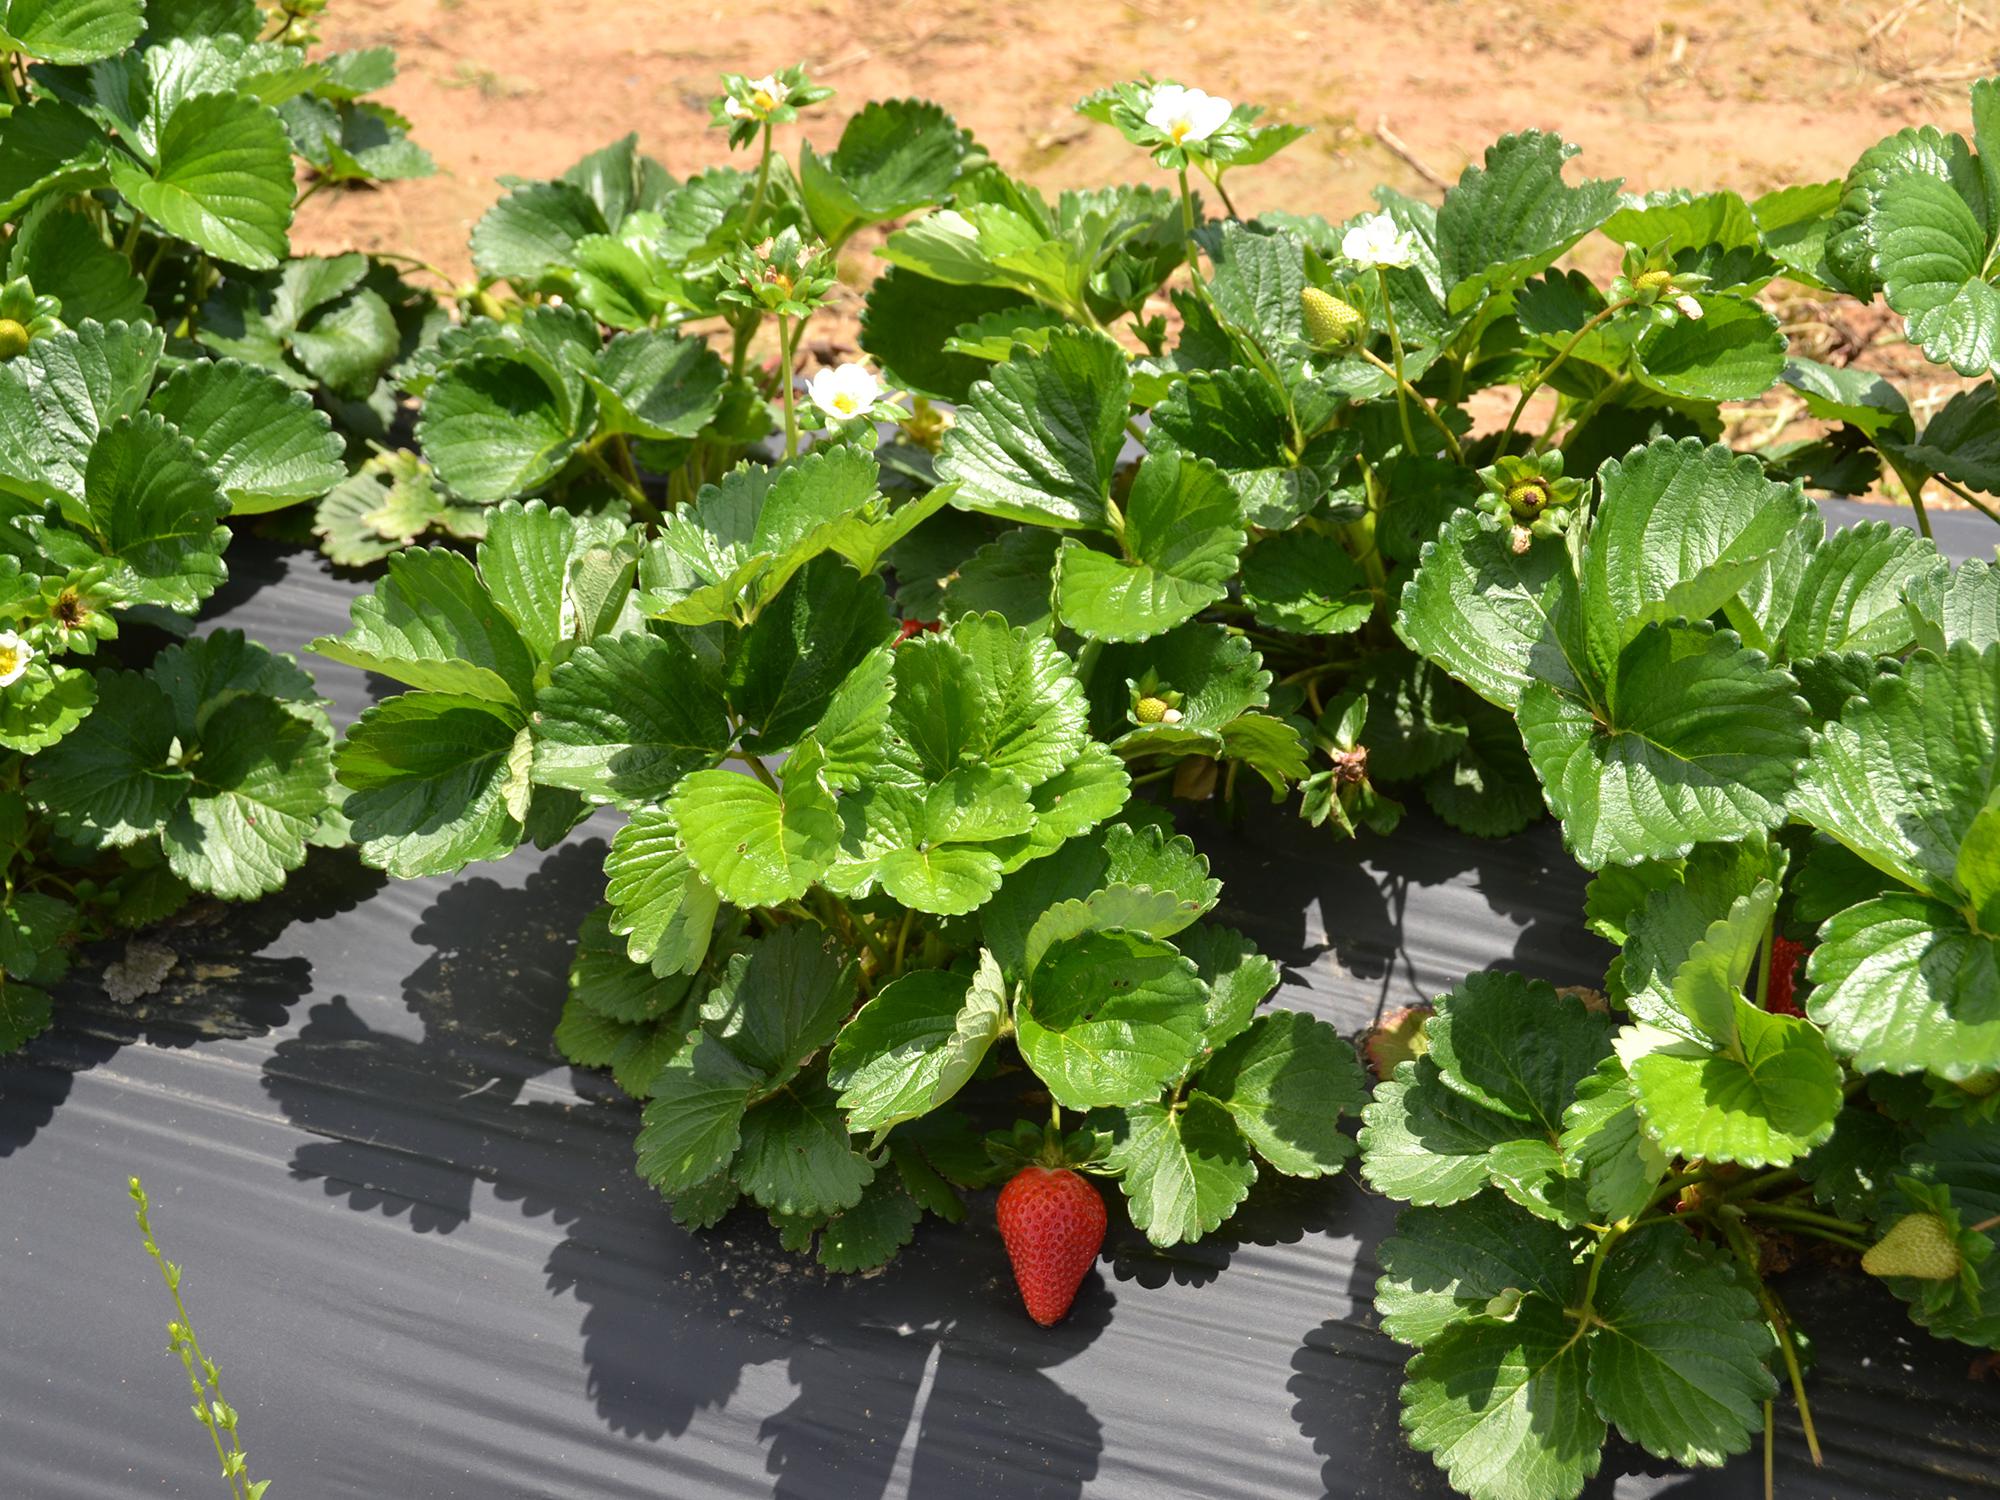 These Merced variety strawberries growing at the Mississippi State University Truck Crops Branch Experiment Station in Crystal Springs looked good on April 21, 2016, despite rainy spring weather that has increased disease pressure on most of Mississippi’s crop. Researchers at the station are conducting a strawberry variety trial to help Mississippi producers choose the best performing varieties for the state. (Photo by MSU Extension Service/Susan Collins-Smith)